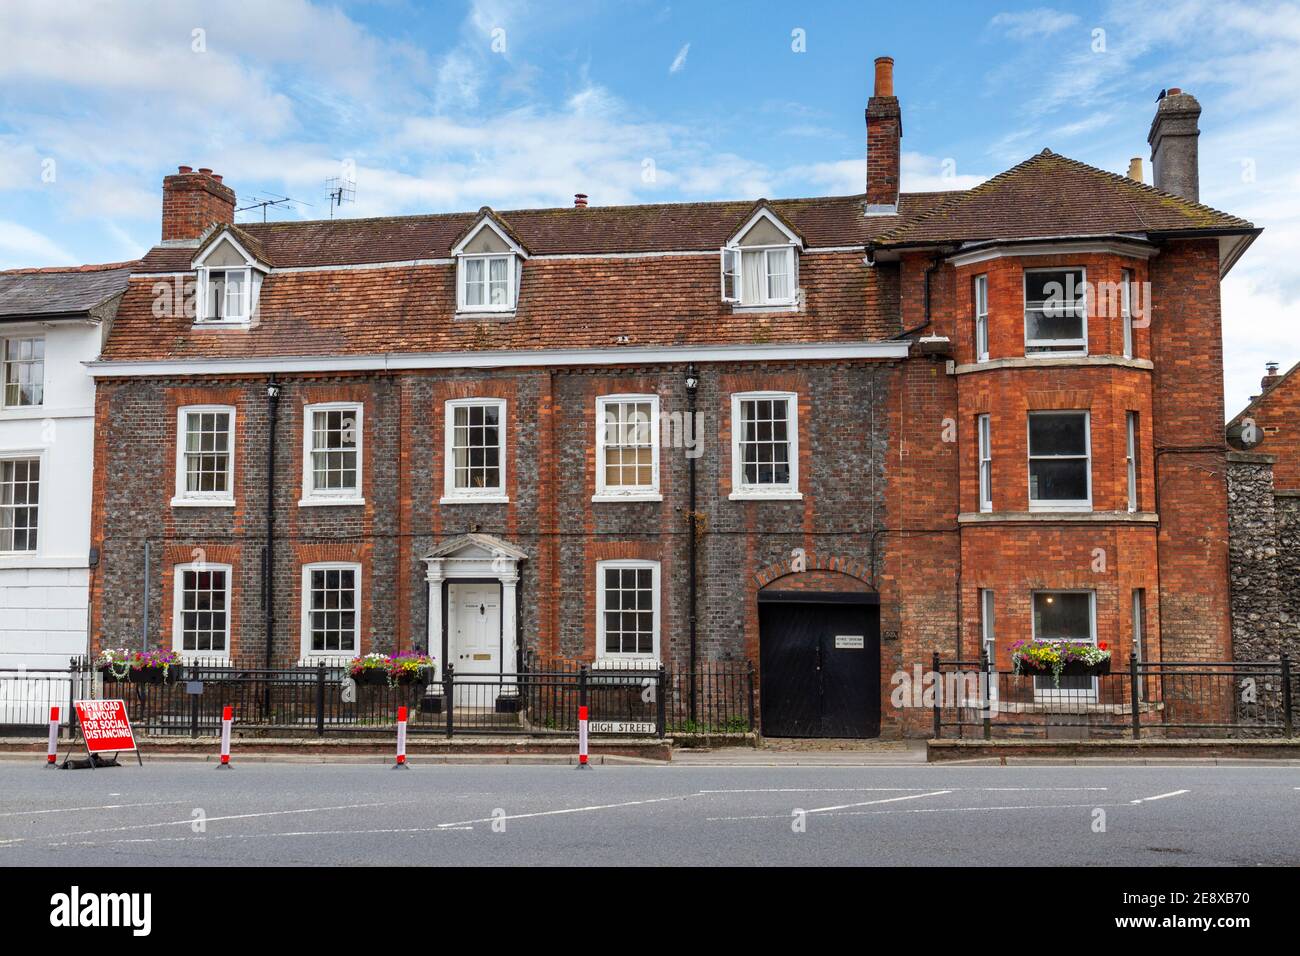 Wykeham House (1761) on the High Street in the market town of Marlborough, Wiltshire, UK. Stock Photo